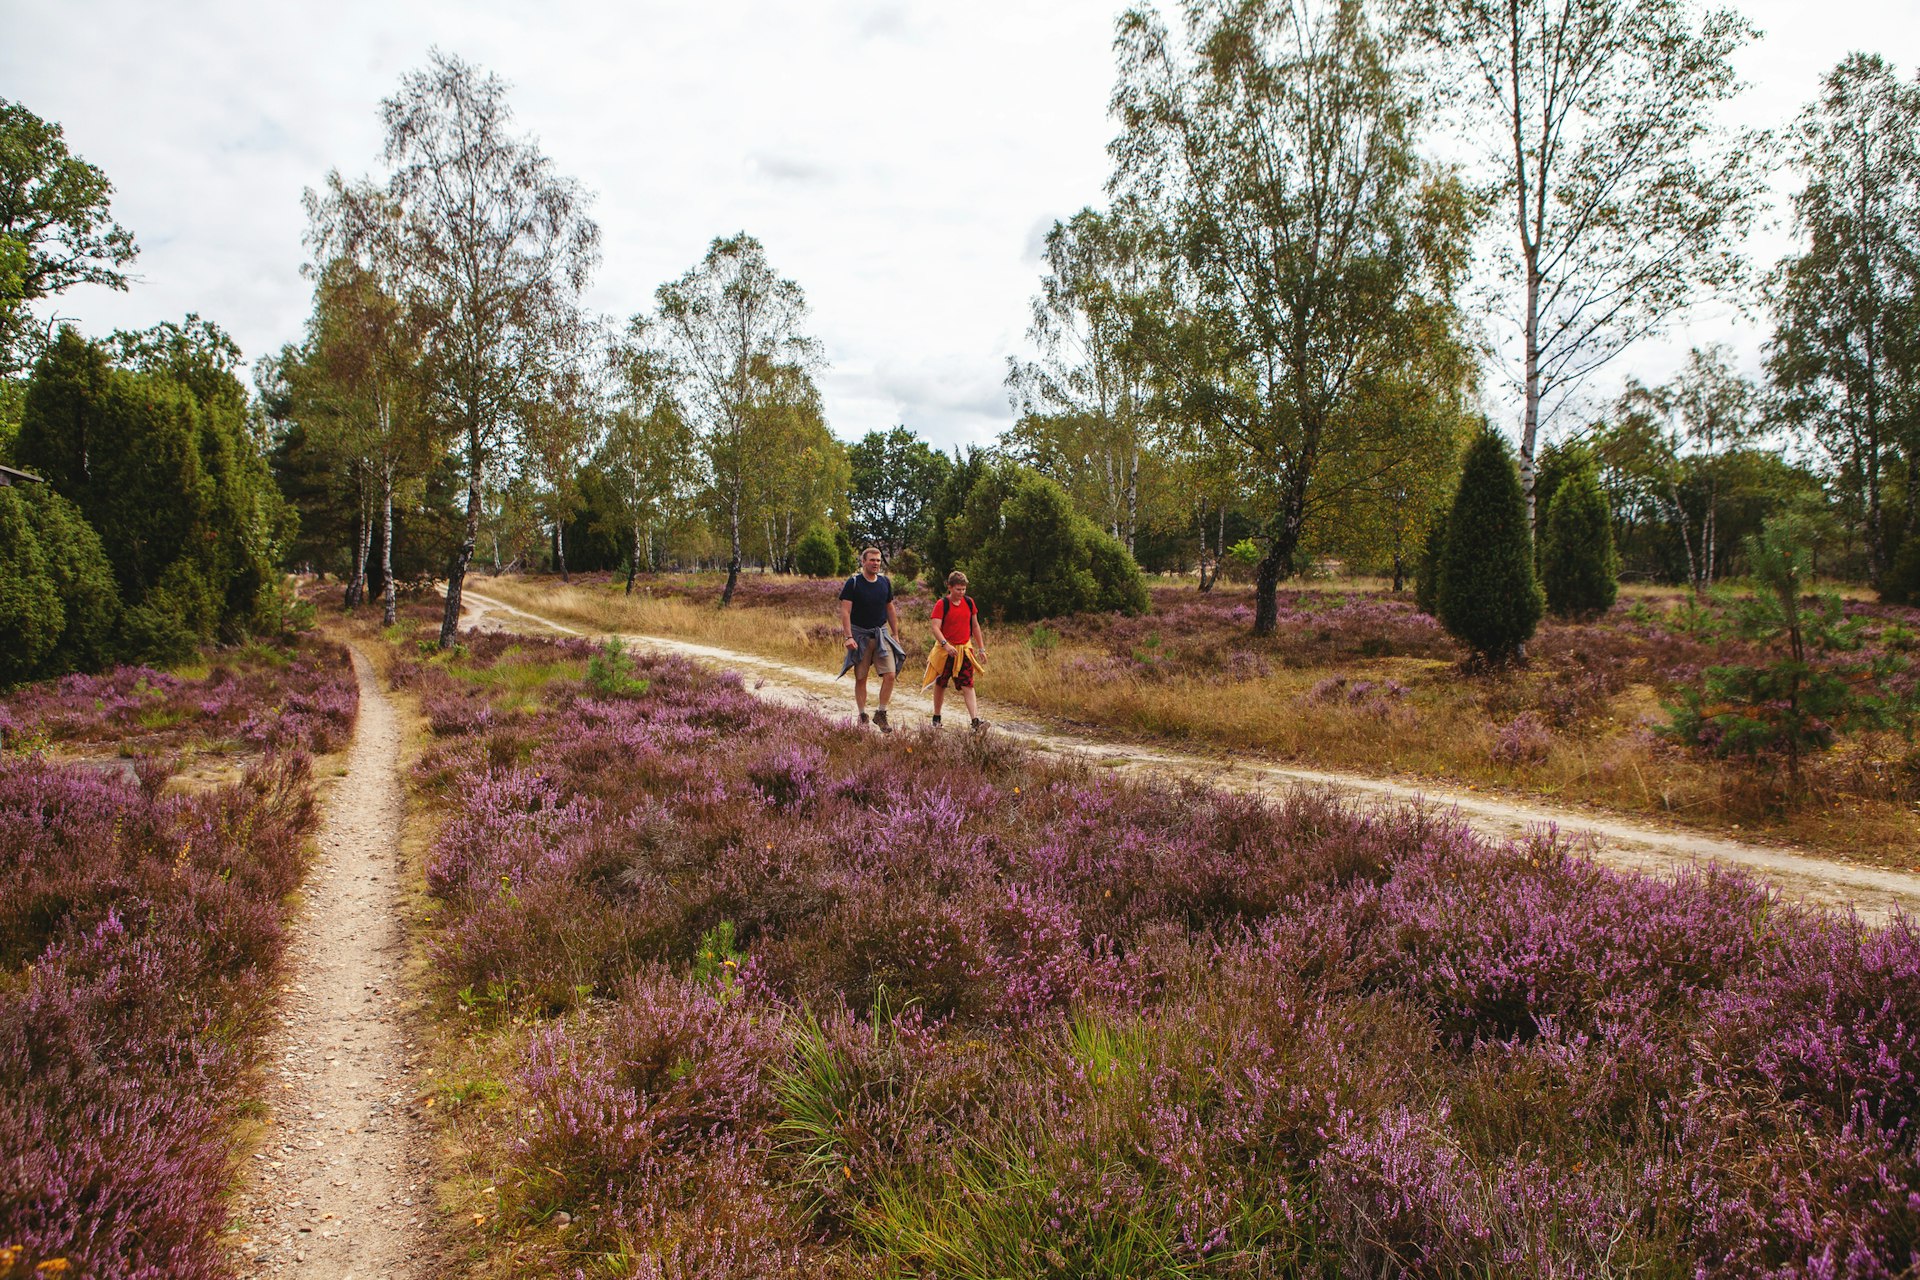 A father and a son walk along a trail surrounded by purple heather in bloom